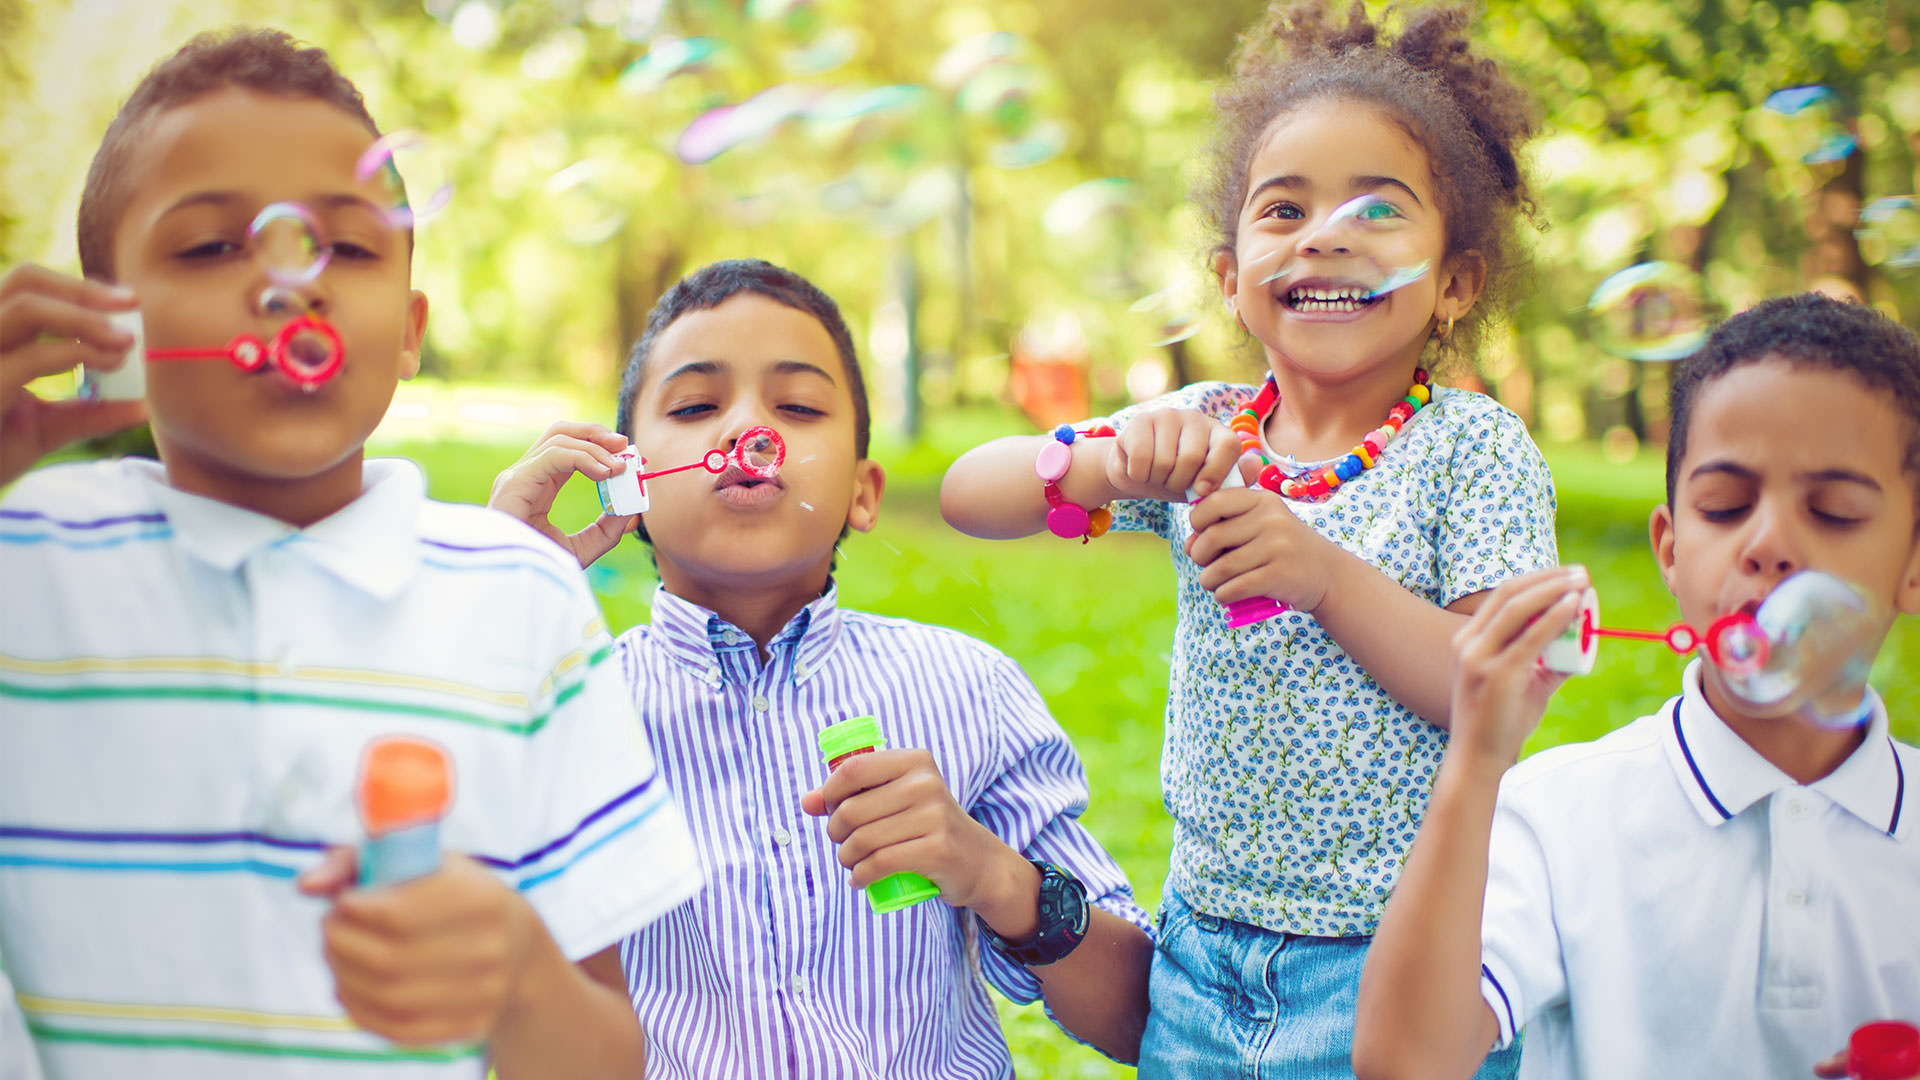 Child Care Resources | Summer Time Means More Time To Play